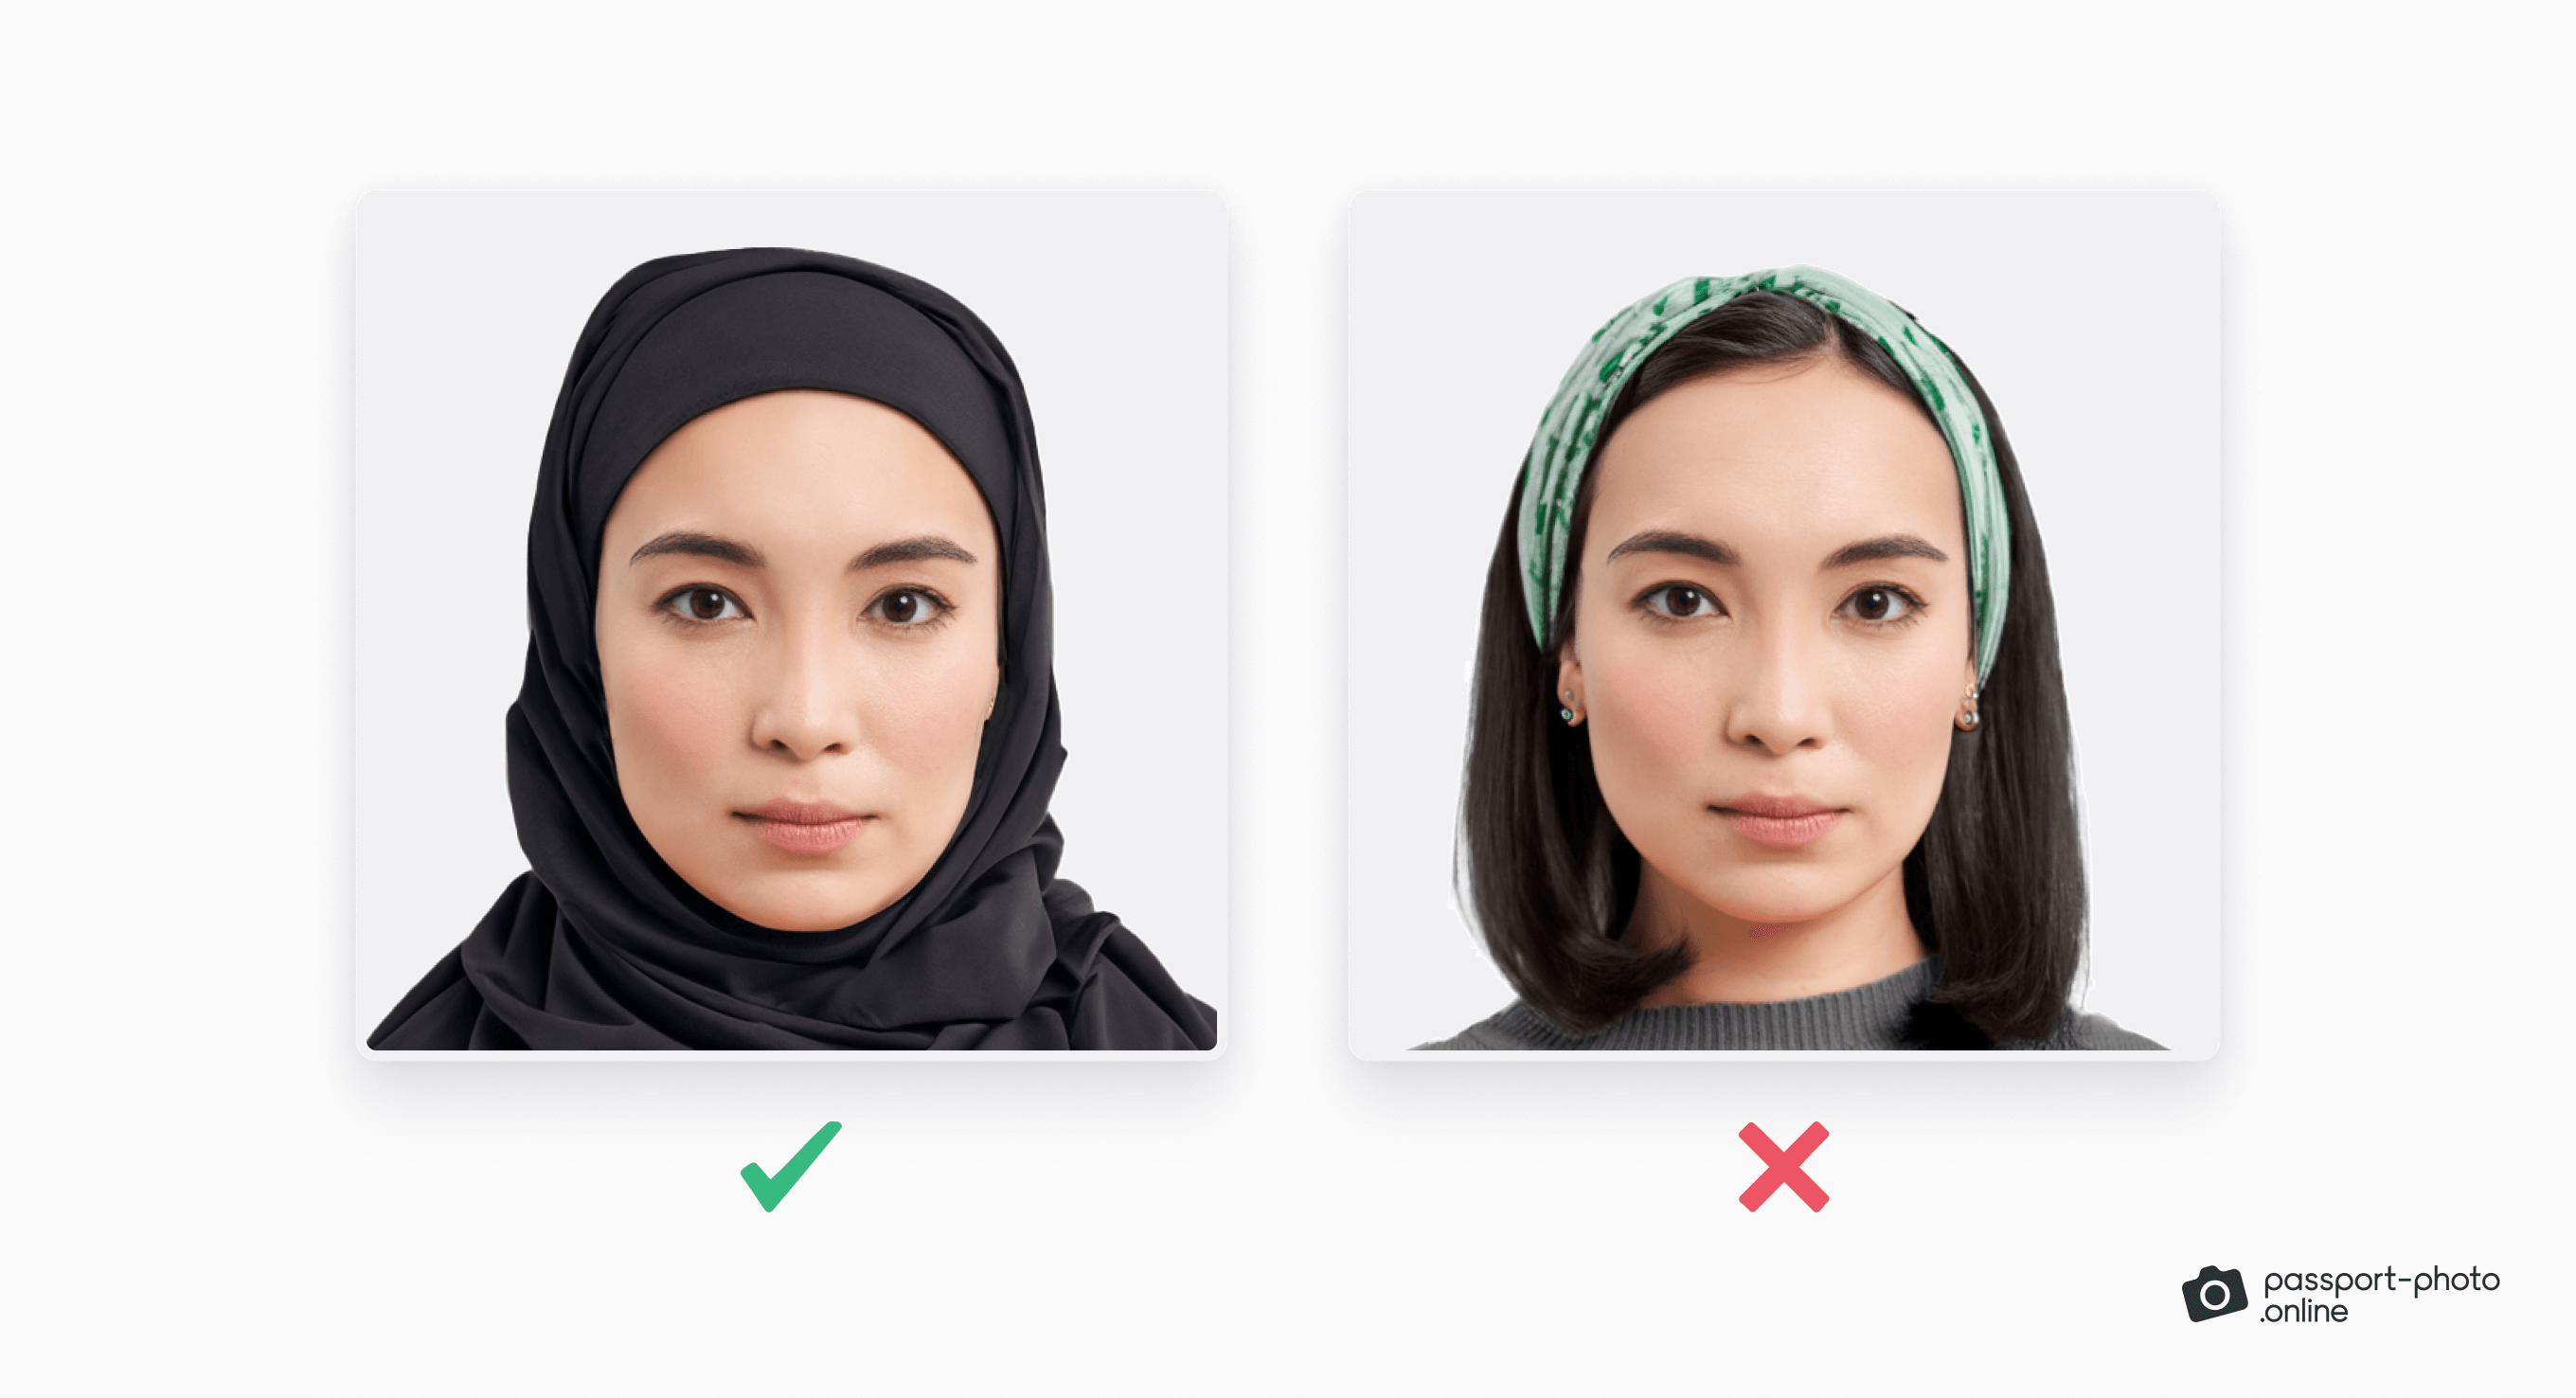 Acceptable and unacceptable hair accessories in a passport photo.